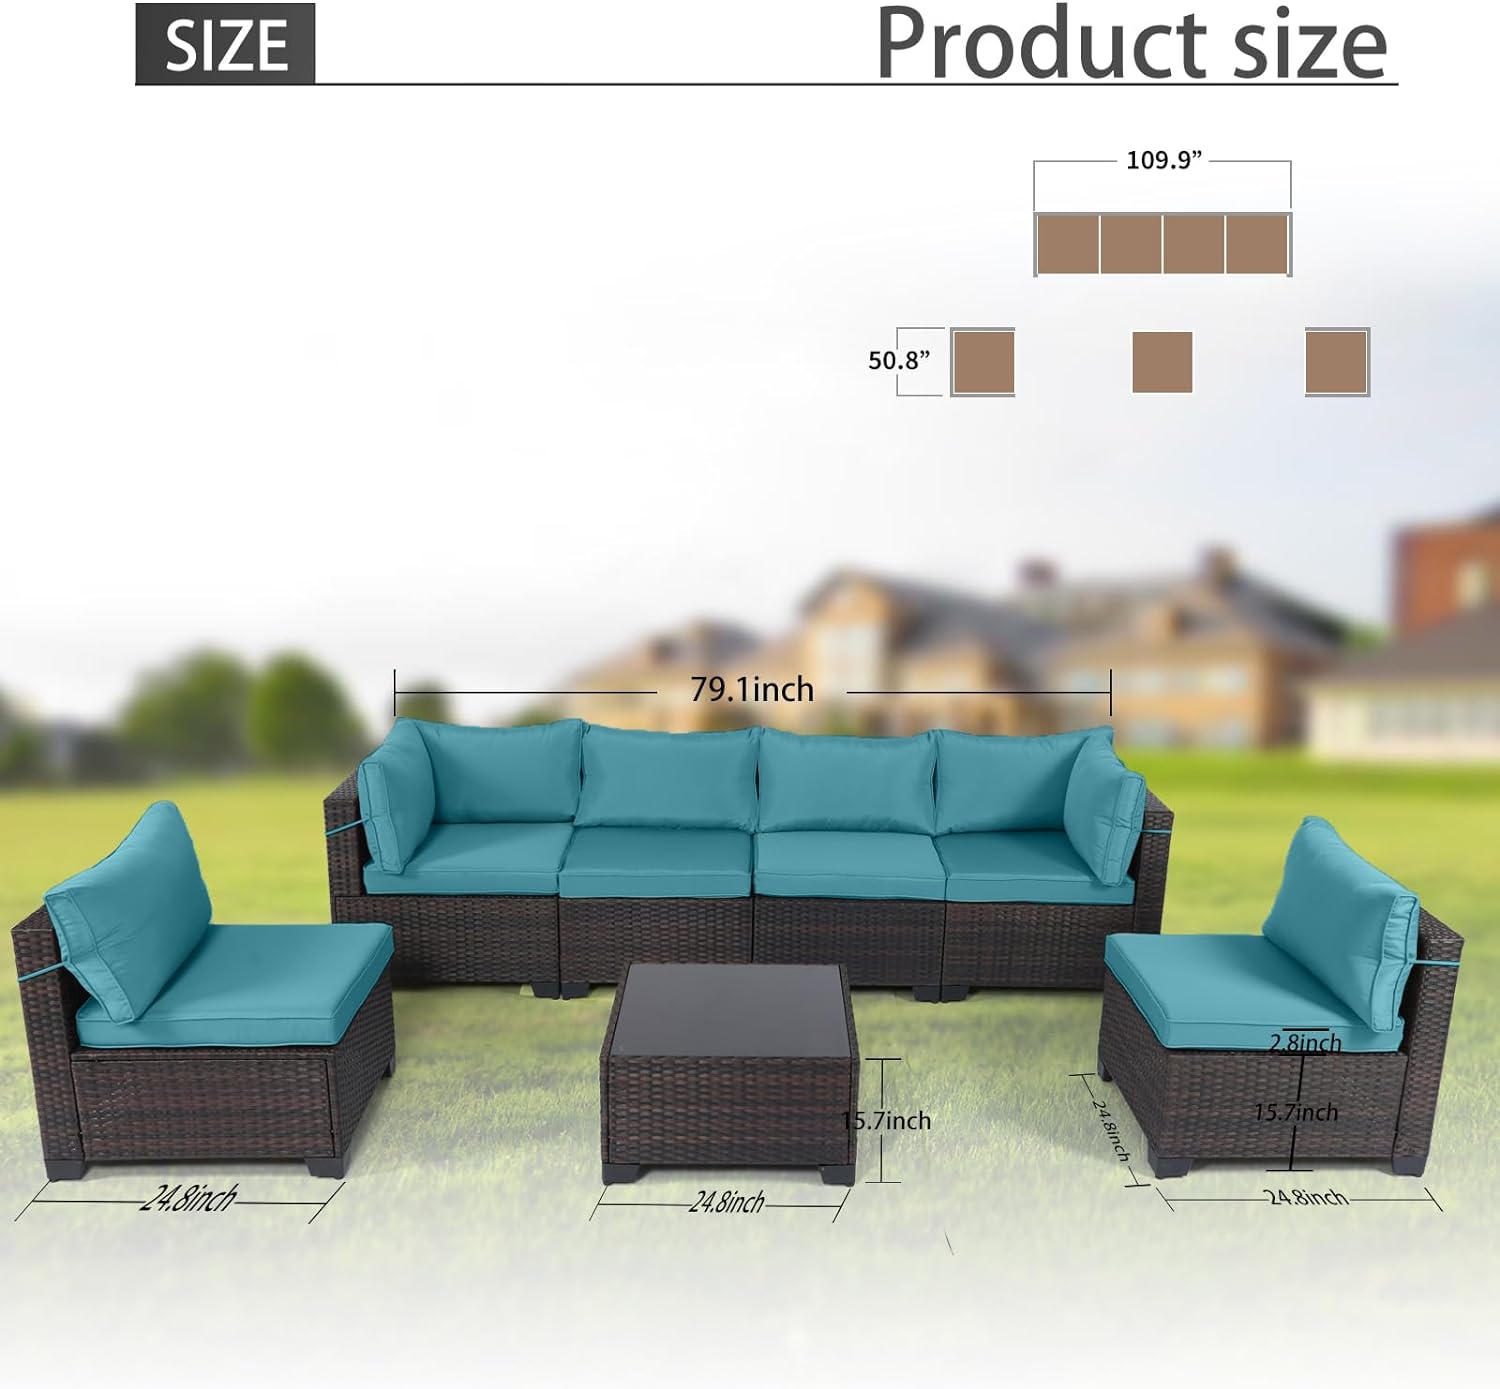 Outdoor Patio Furniture Sets: 7-Piece Rattan Conversation Sectional Set with Wicker Sofa & Tea Table